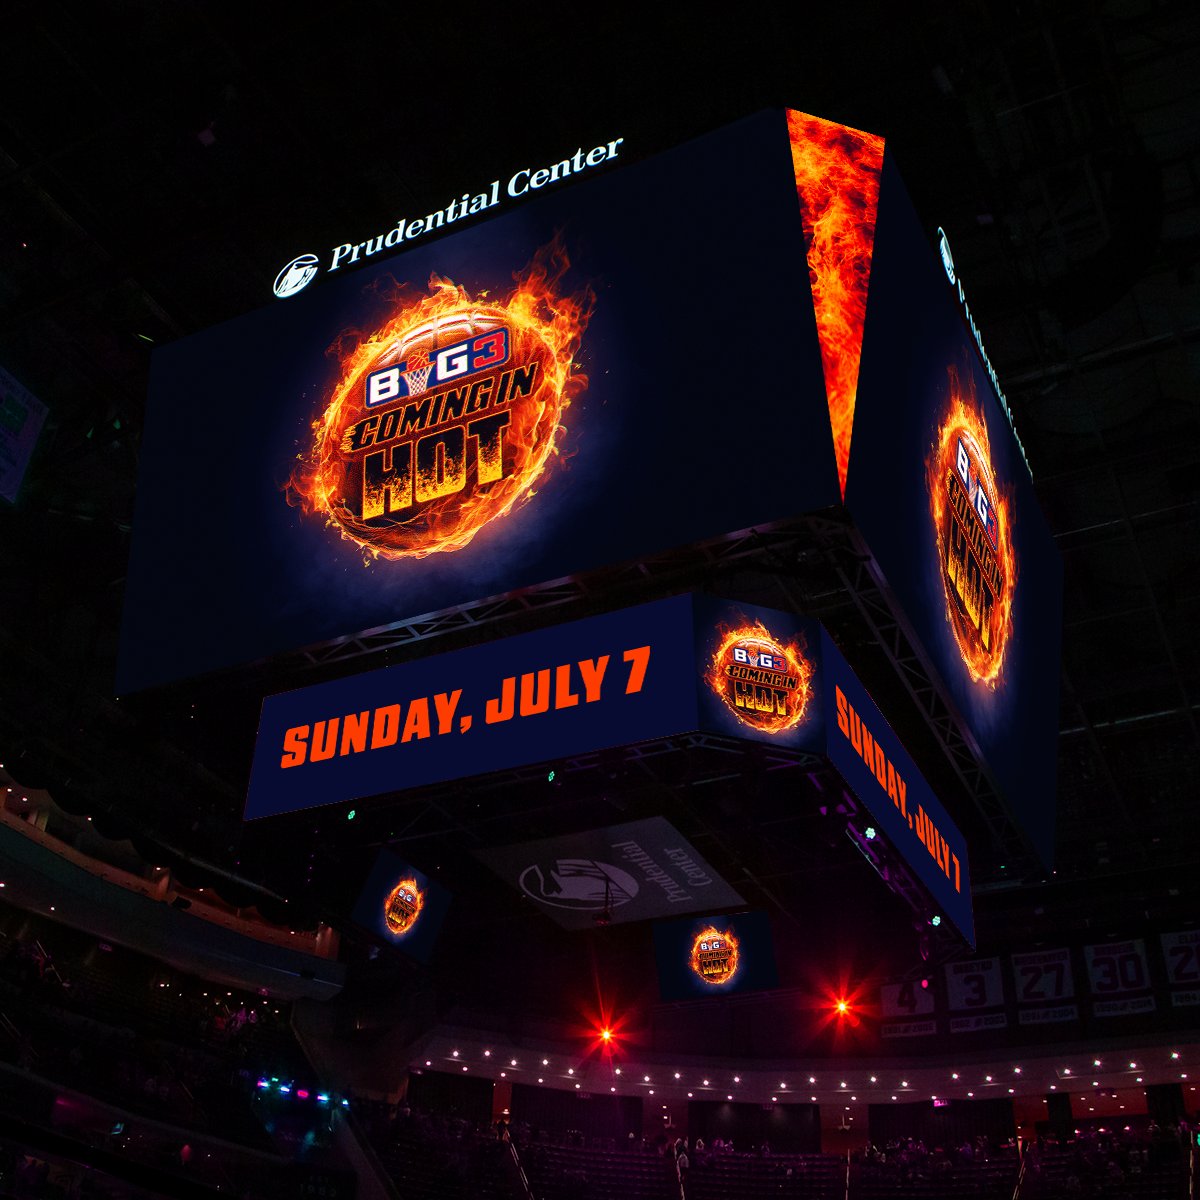 ON SALE NOW 🏀 @thebig3 is COMING IN HOT to #PruCenter on Sunday 7/7 🔥 🎟️: bit.ly/3VrEasv